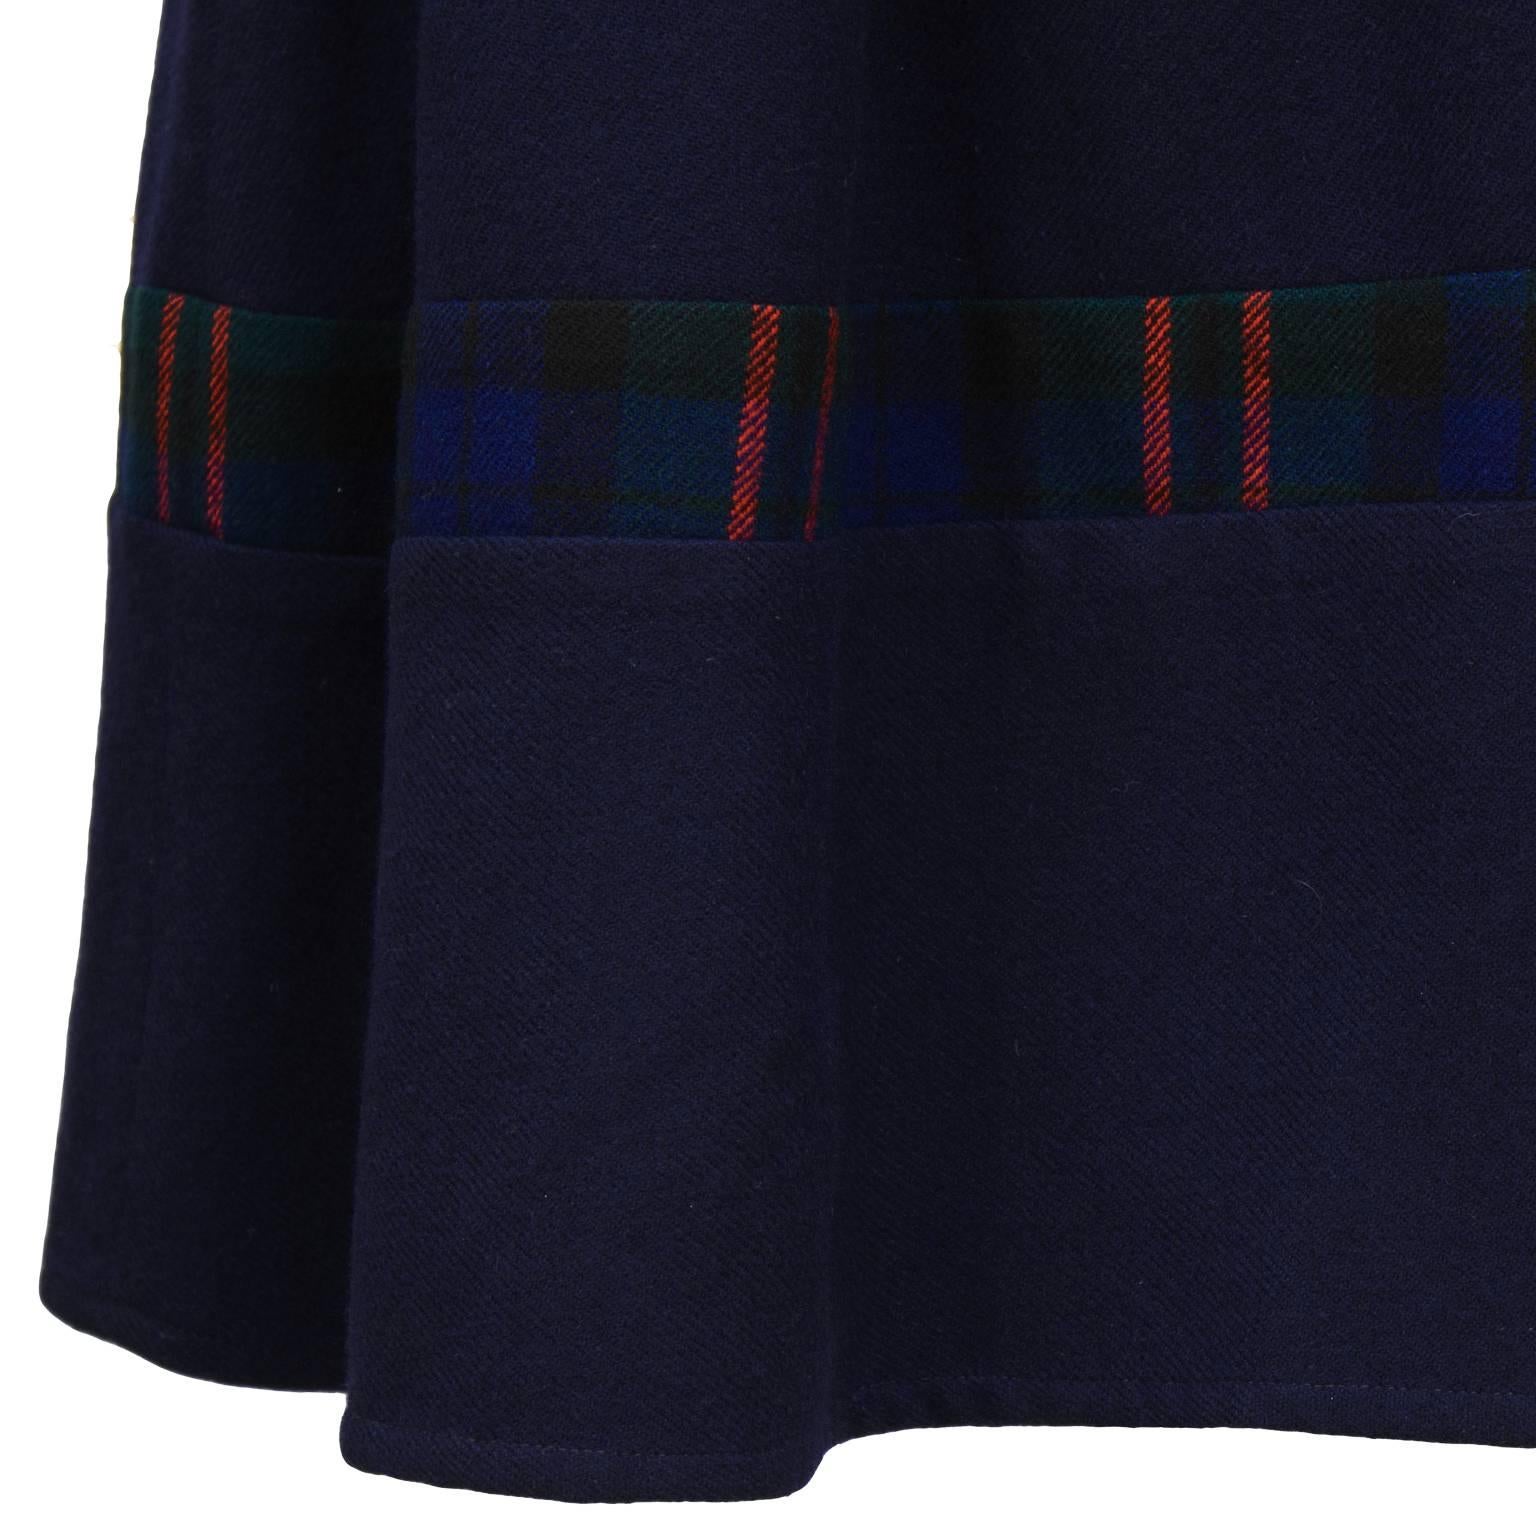 Women's 1970's Navy Wool JUmper With Plaid Details